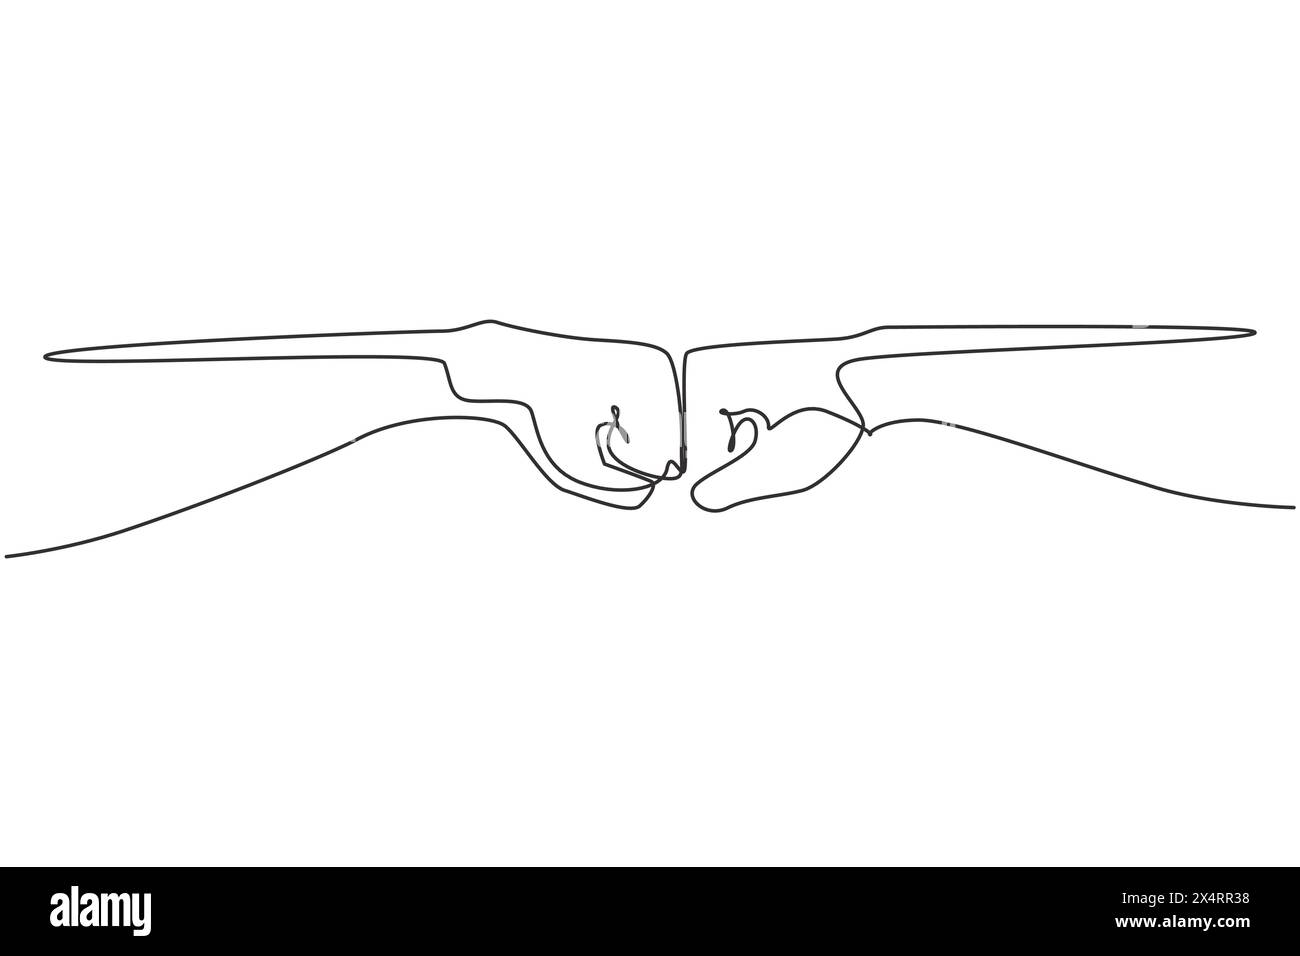 Single continuous line drawing hands of two men pumping their fists. Sign or symbol of power, hitting, attack, force. Communication with hand gestures Stock Vector